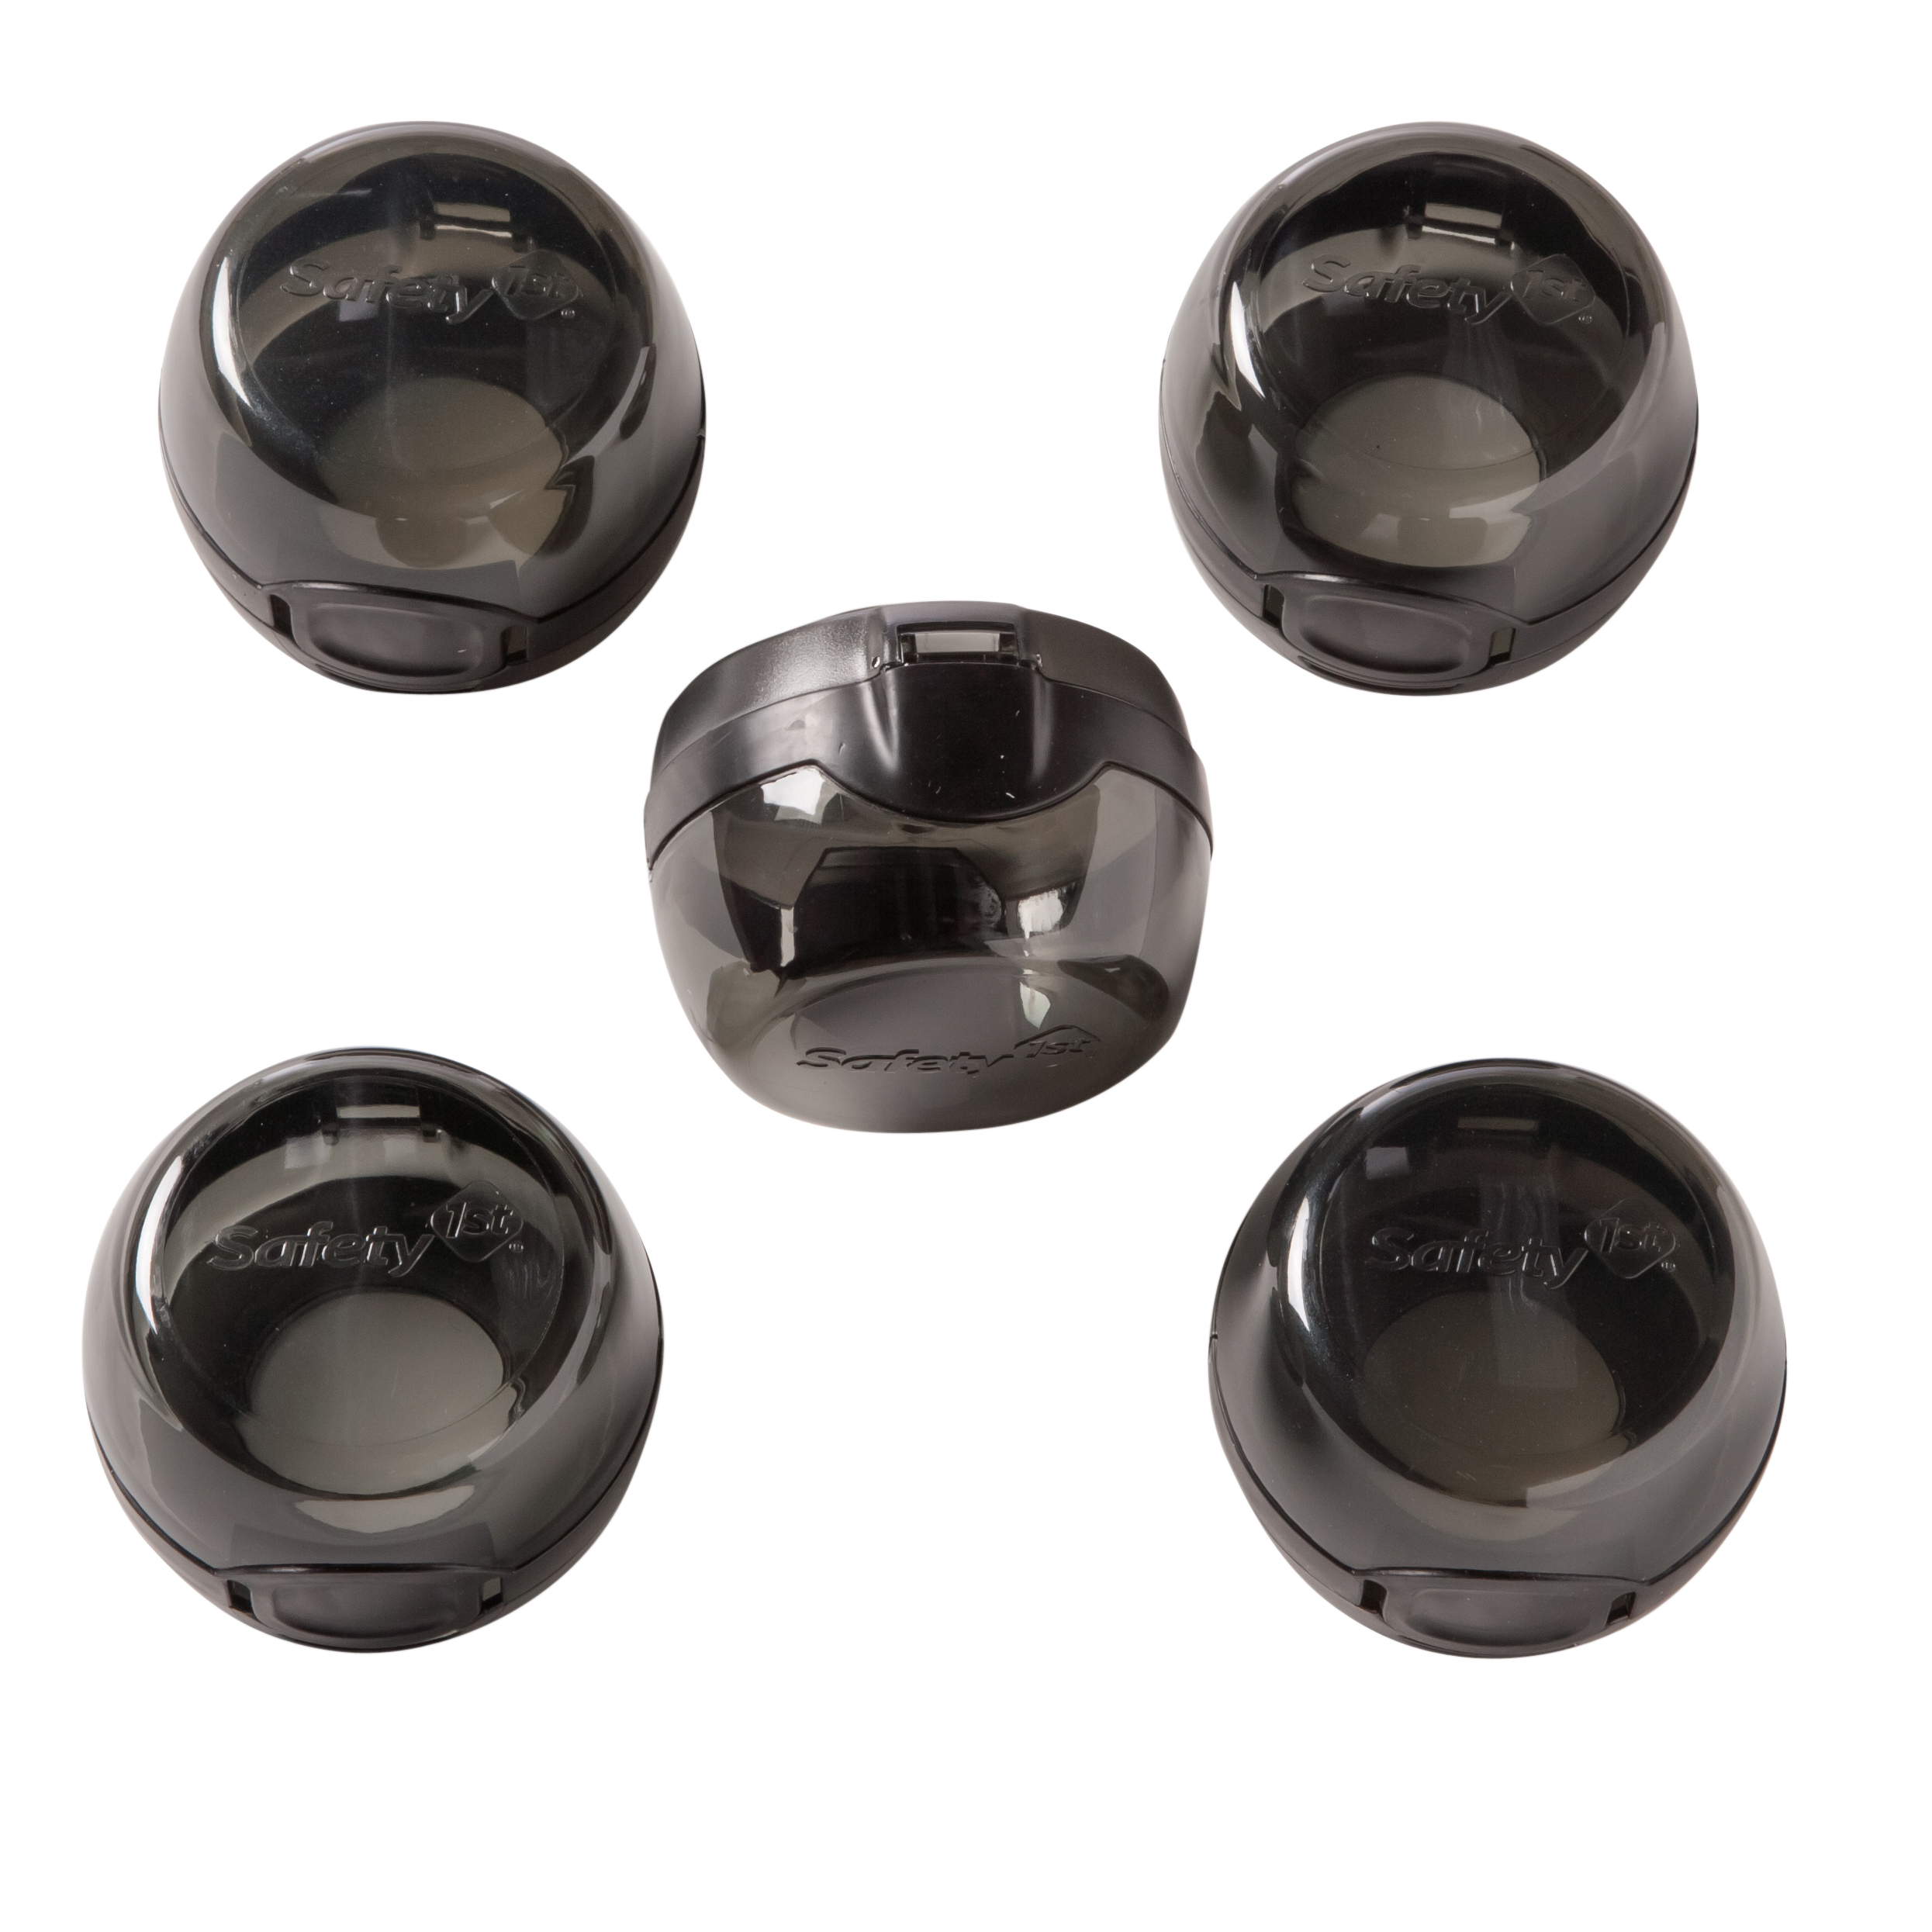 Safety 1st Universal Design Stove Knob Covers, Black - image 2 of 4